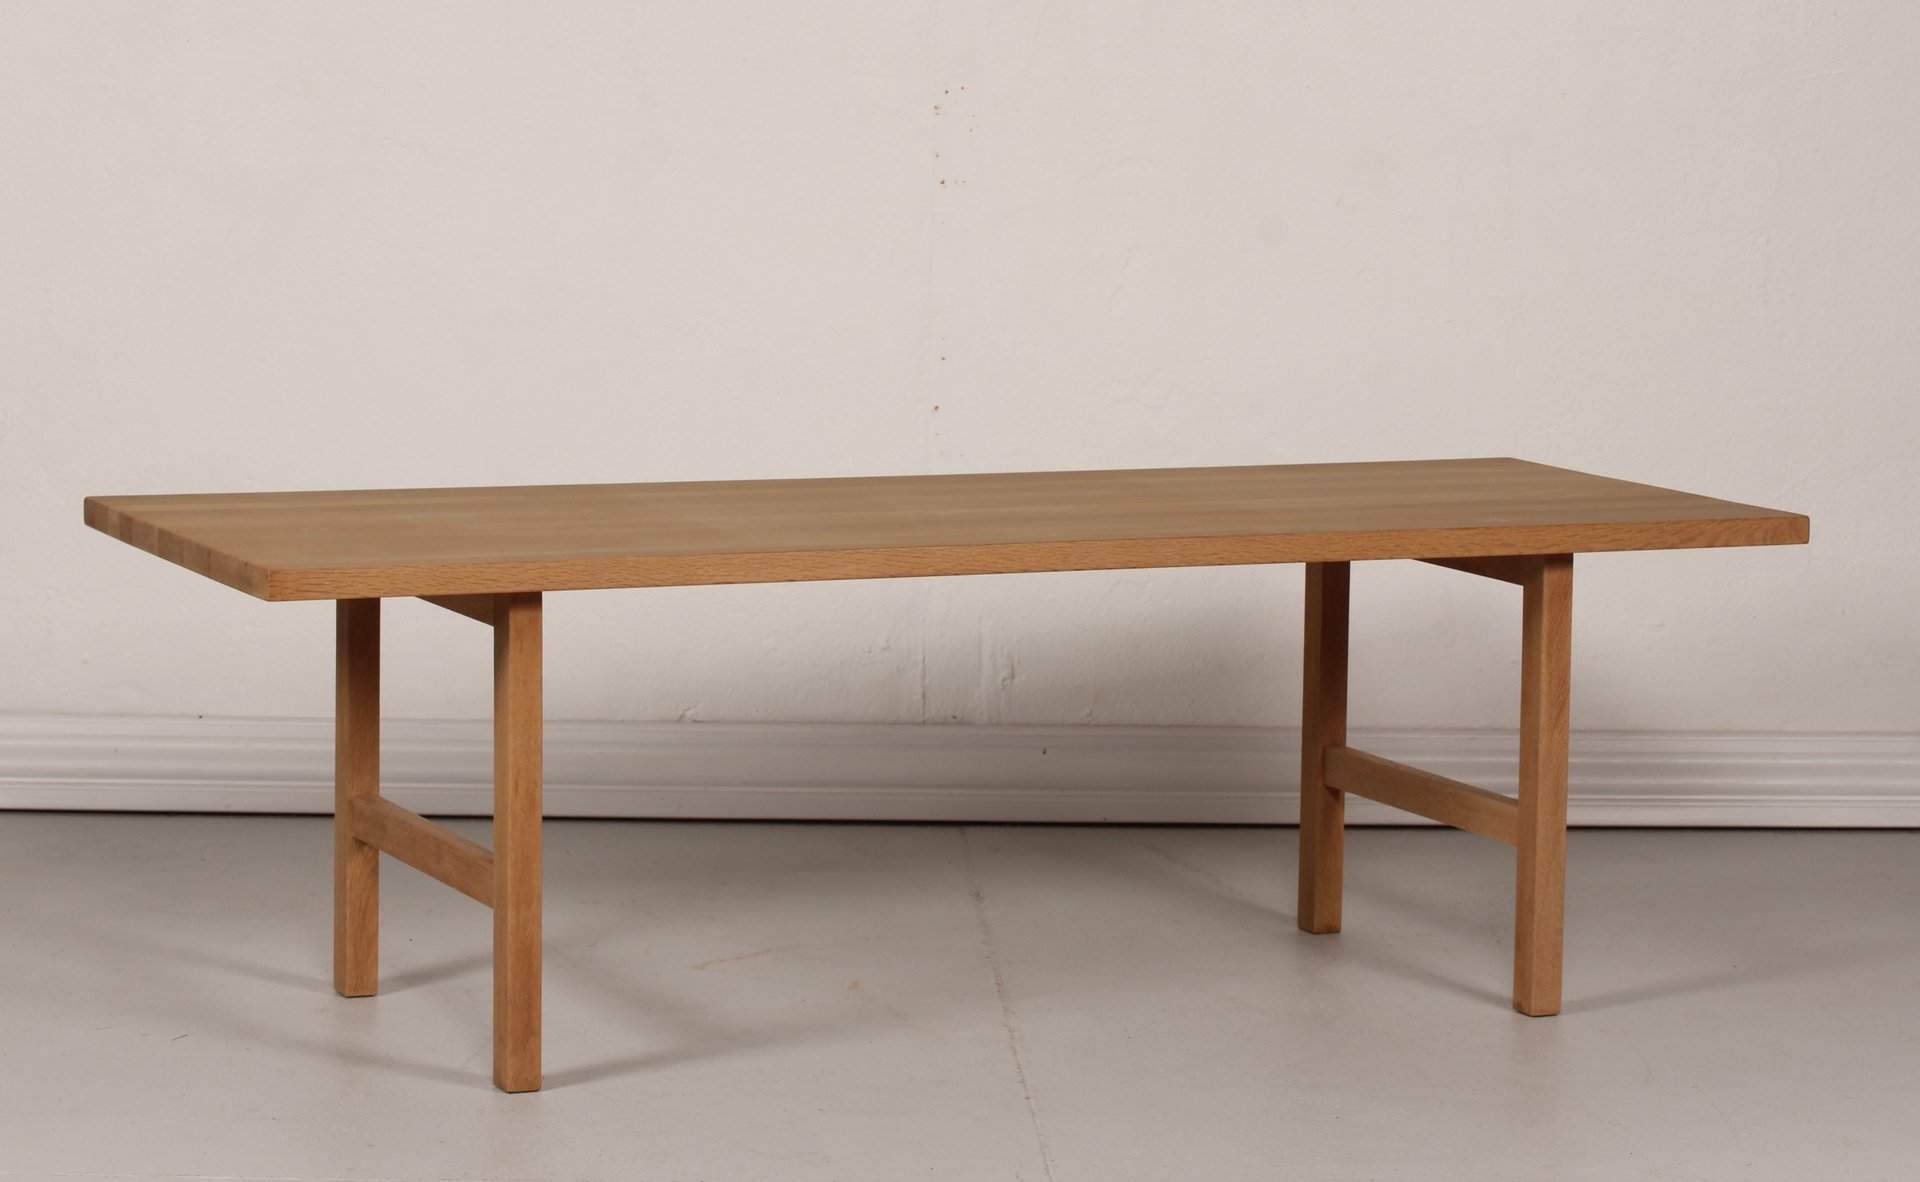 Vintage Danish Oak Long and Low Coffee Table, 1970s for sale at Pamono